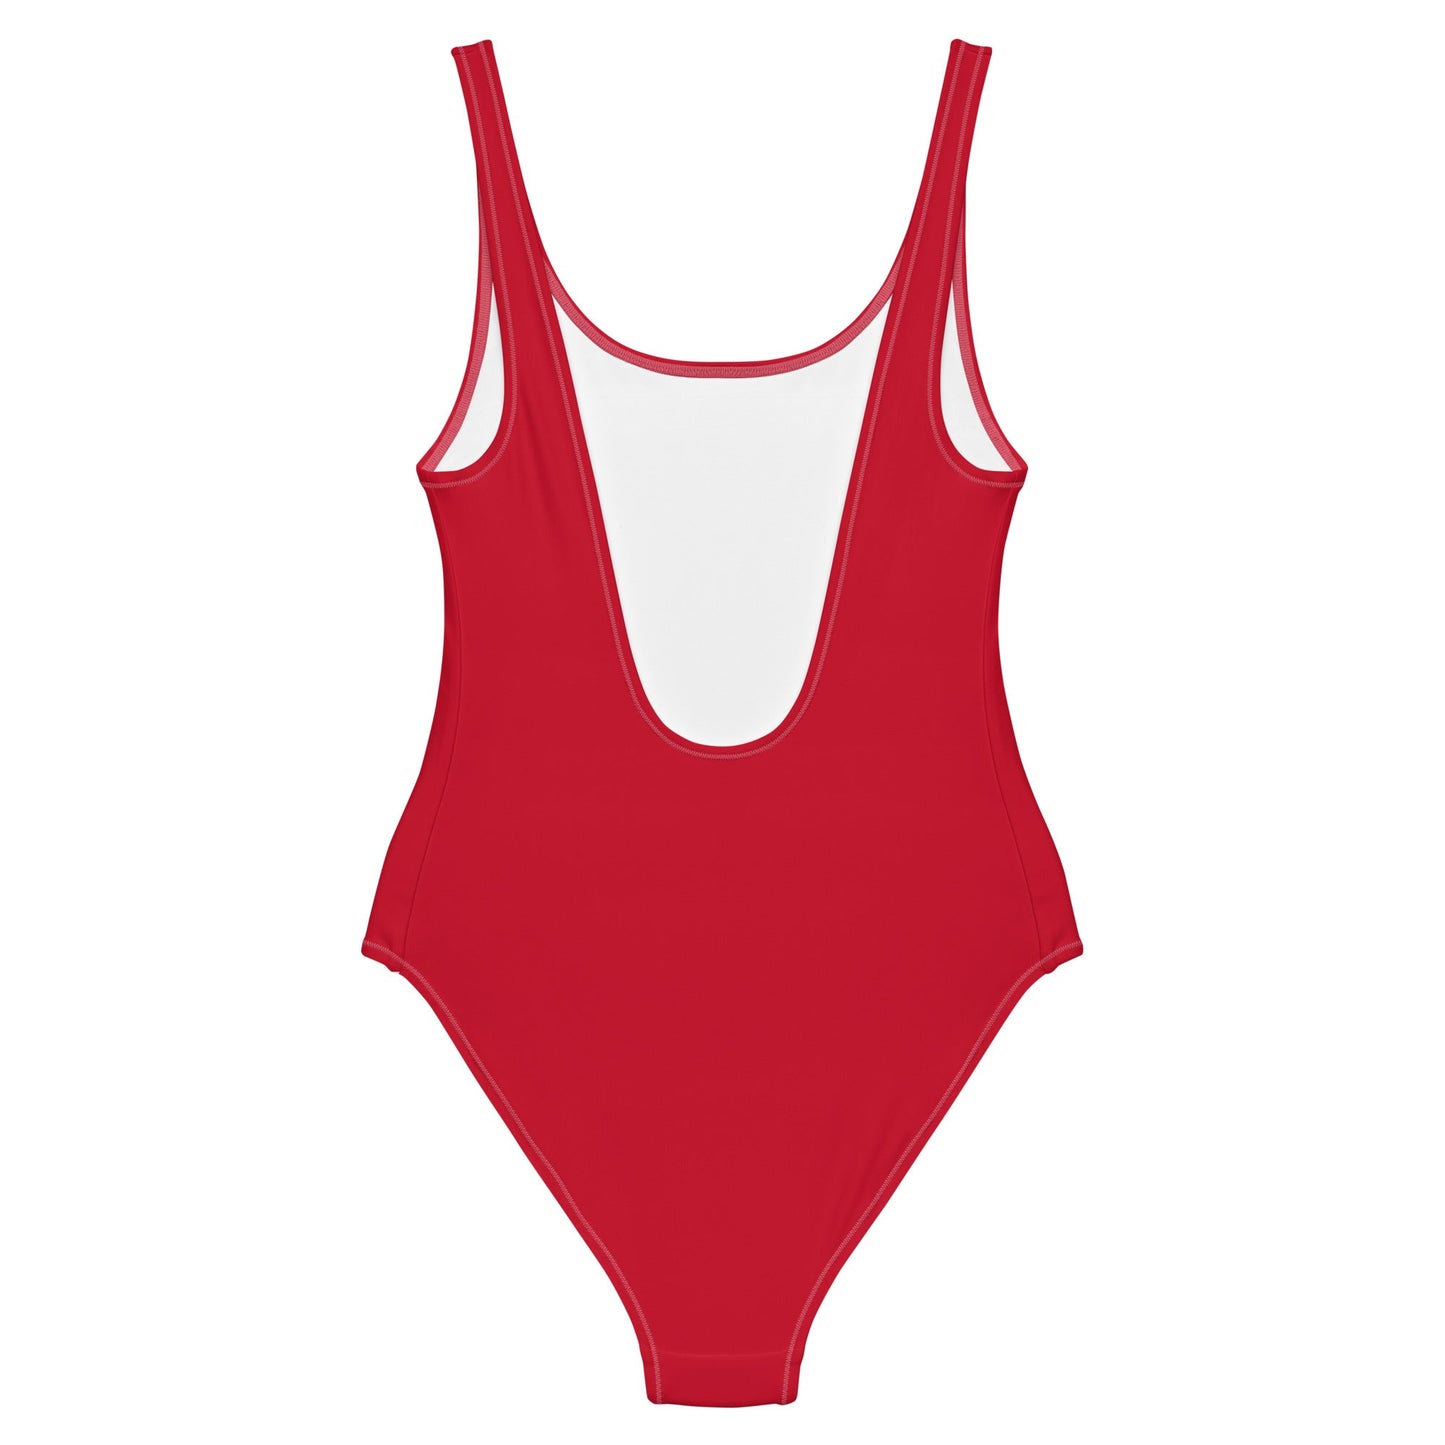 Kennedy for President Flag One - Piece Swimsuit - TEAM KENNEDY. All rights reserved